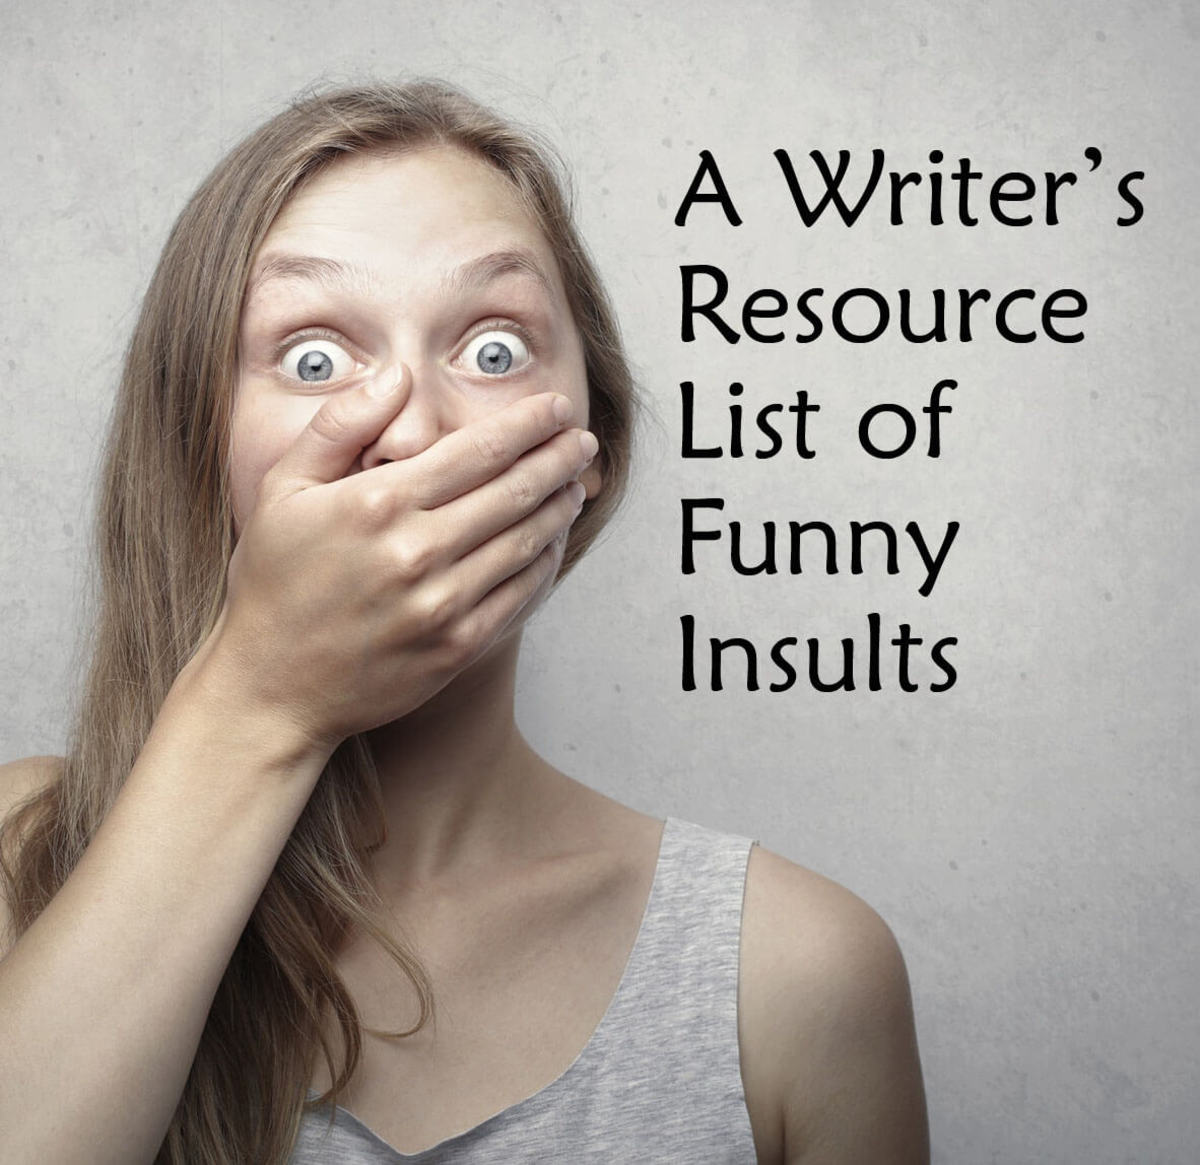 A Writer’s Resource List of Funny Insults